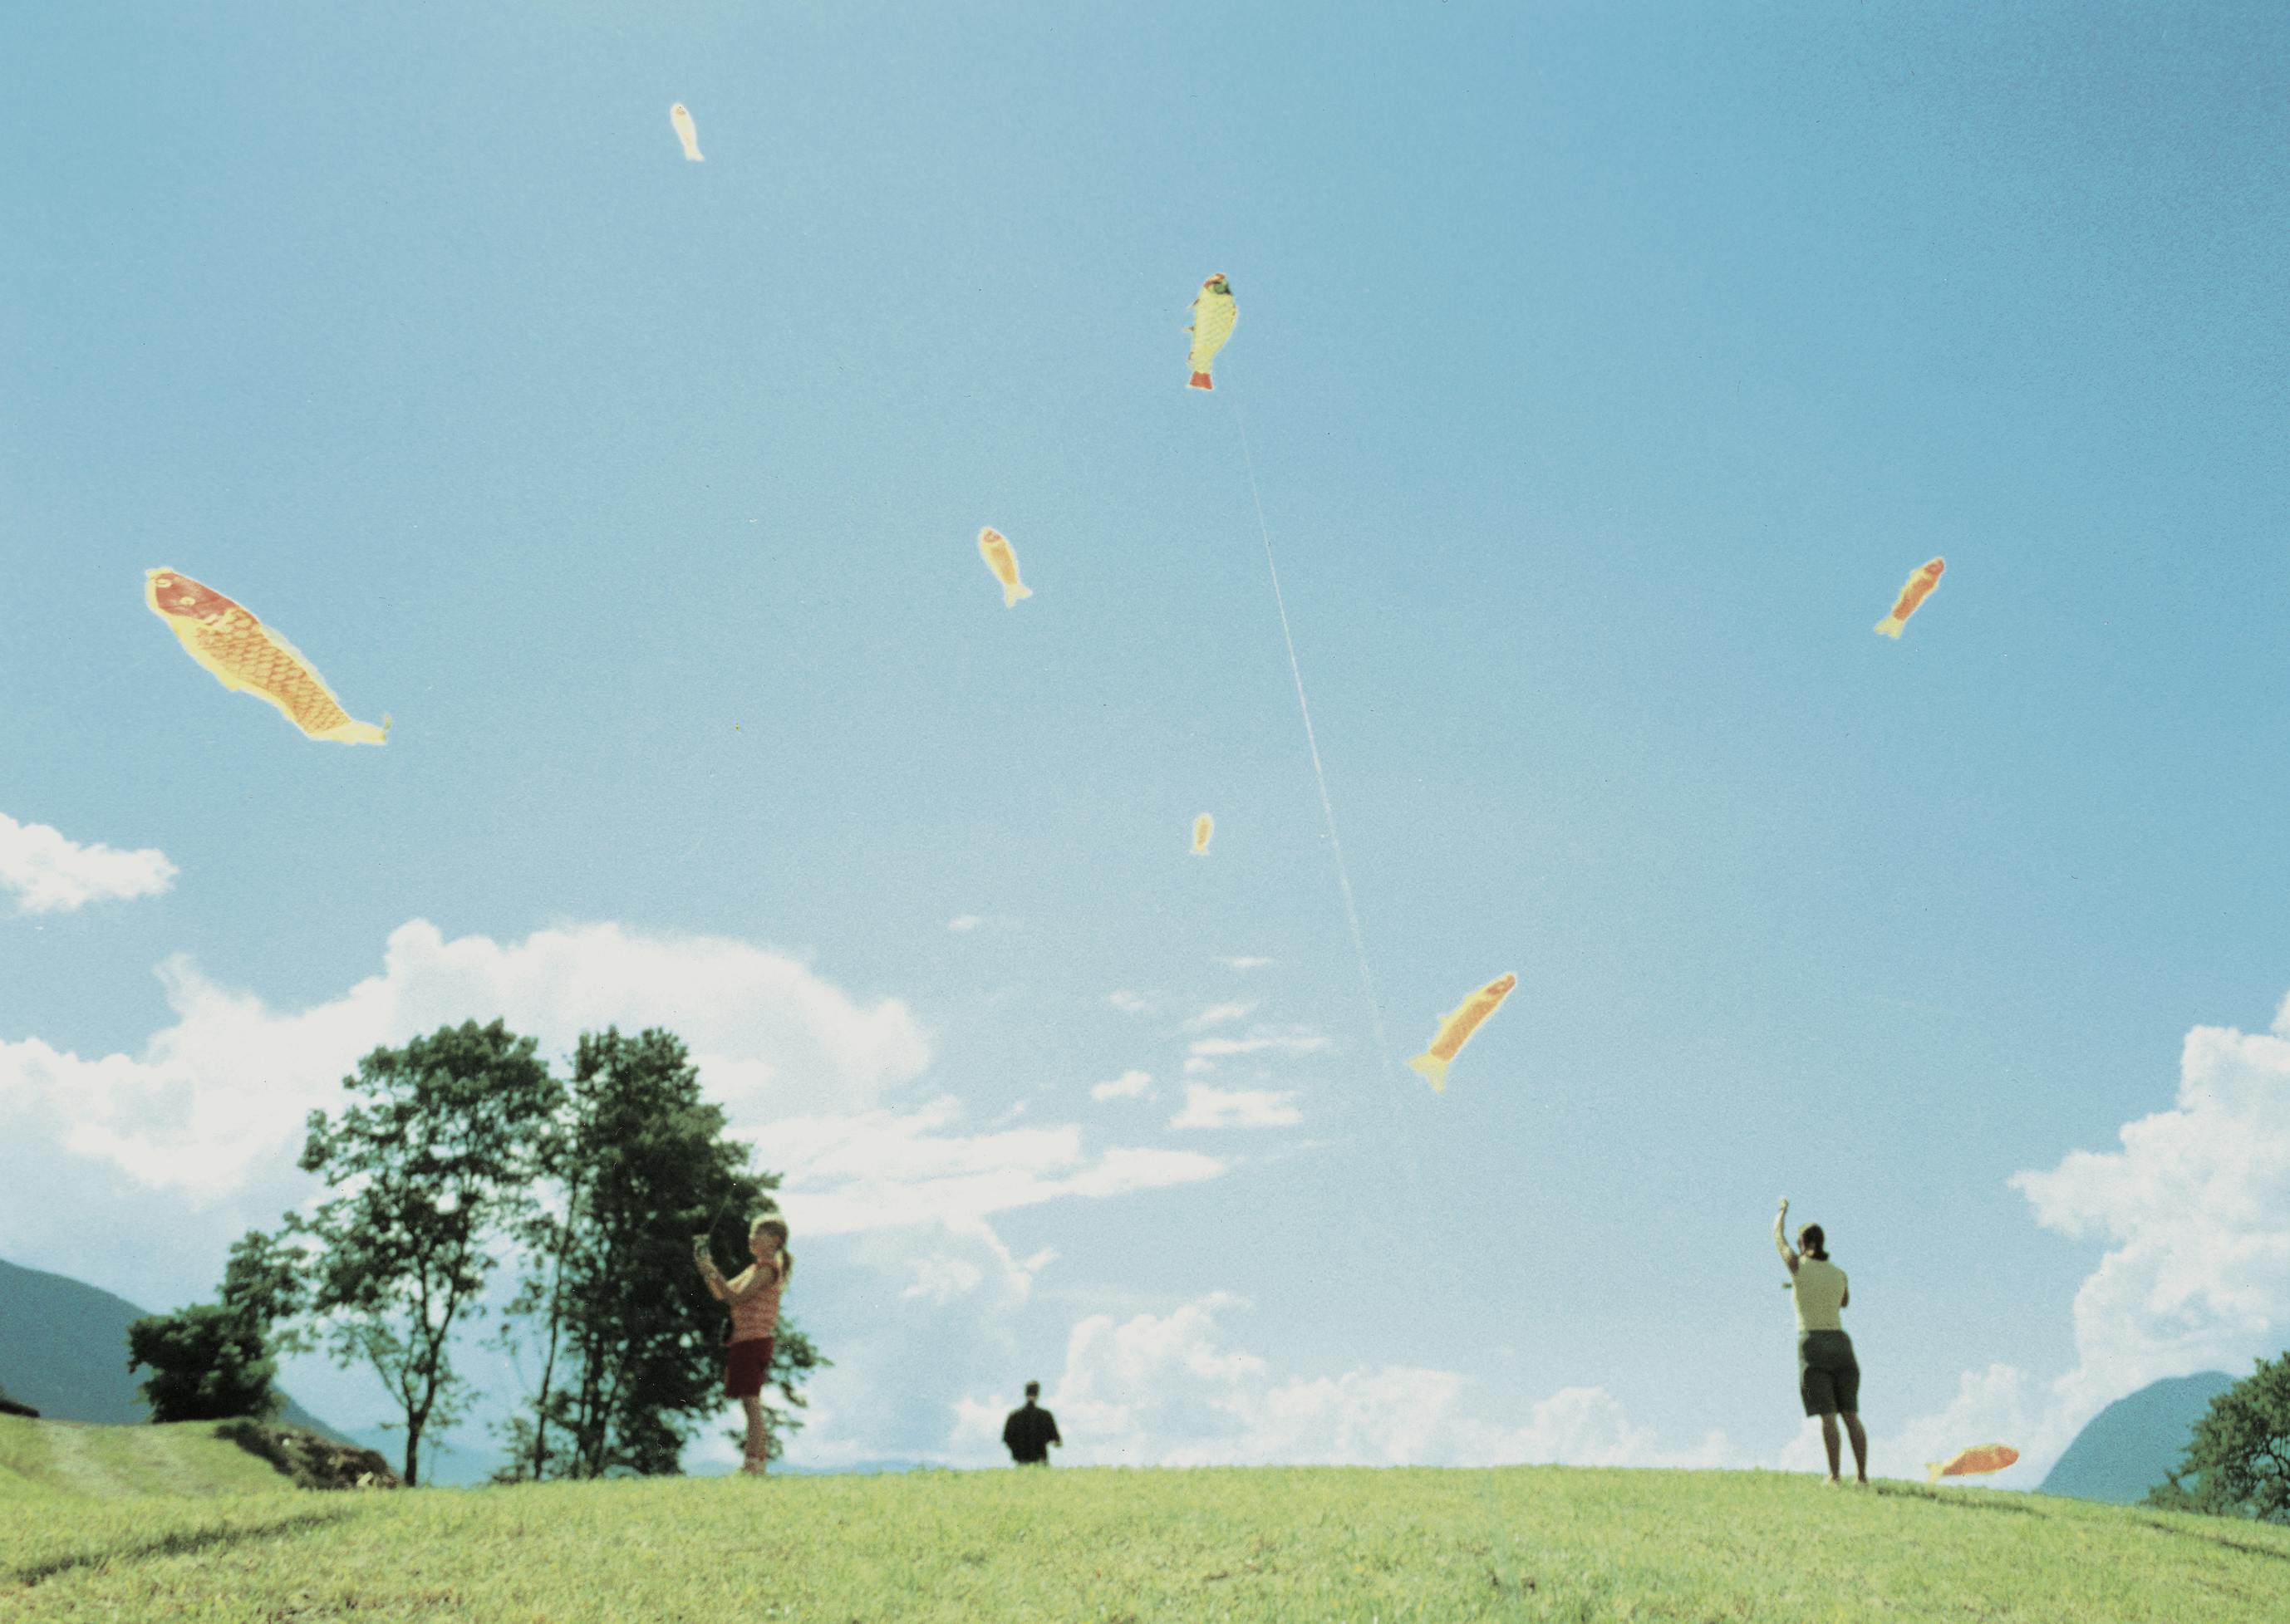 An image of people standing on a grassy landscape flying orange fish-shaped kites on a sunny date. The sky is bright blue, taking up most of the image. 